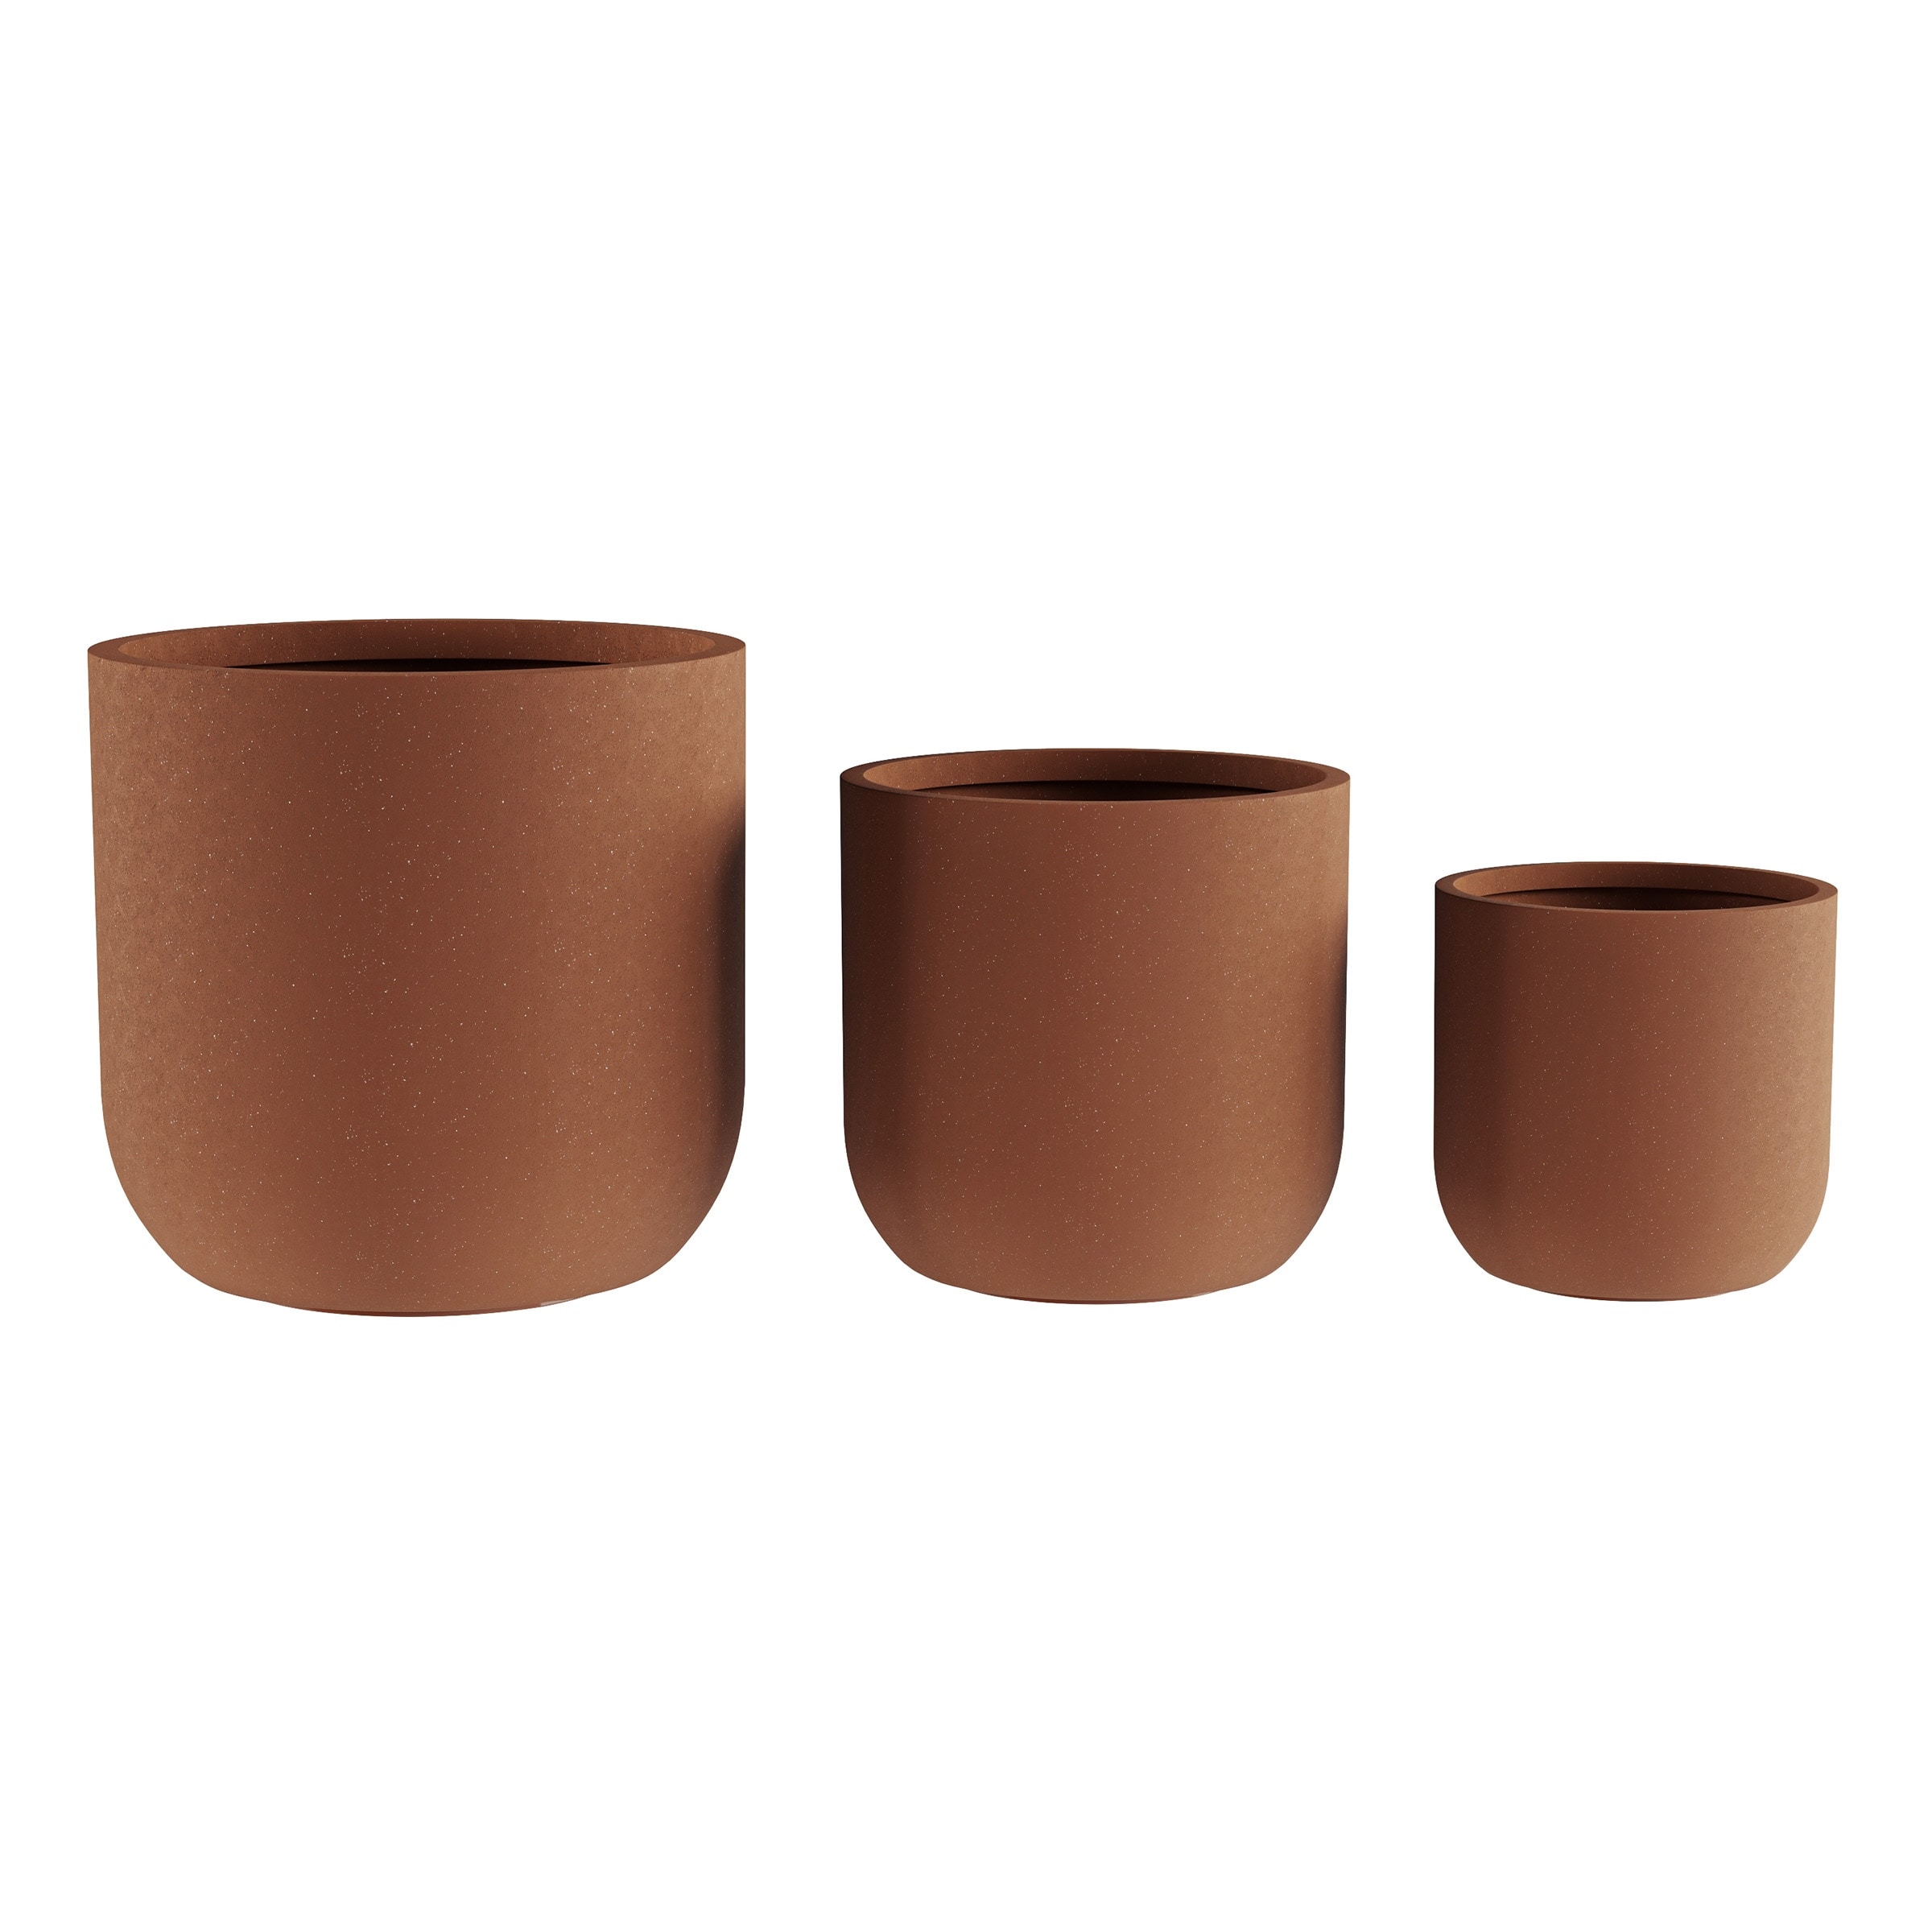 https://ak1.ostkcdn.com/images/products/is/images/direct/9a9f82dcb3e24476001c4791ca6ebef71f59f056/Fiber-Clay-Planters---3-Piece-Cylinder-Pot-Set-by-Pure-Garden-%28Brown%29.jpg